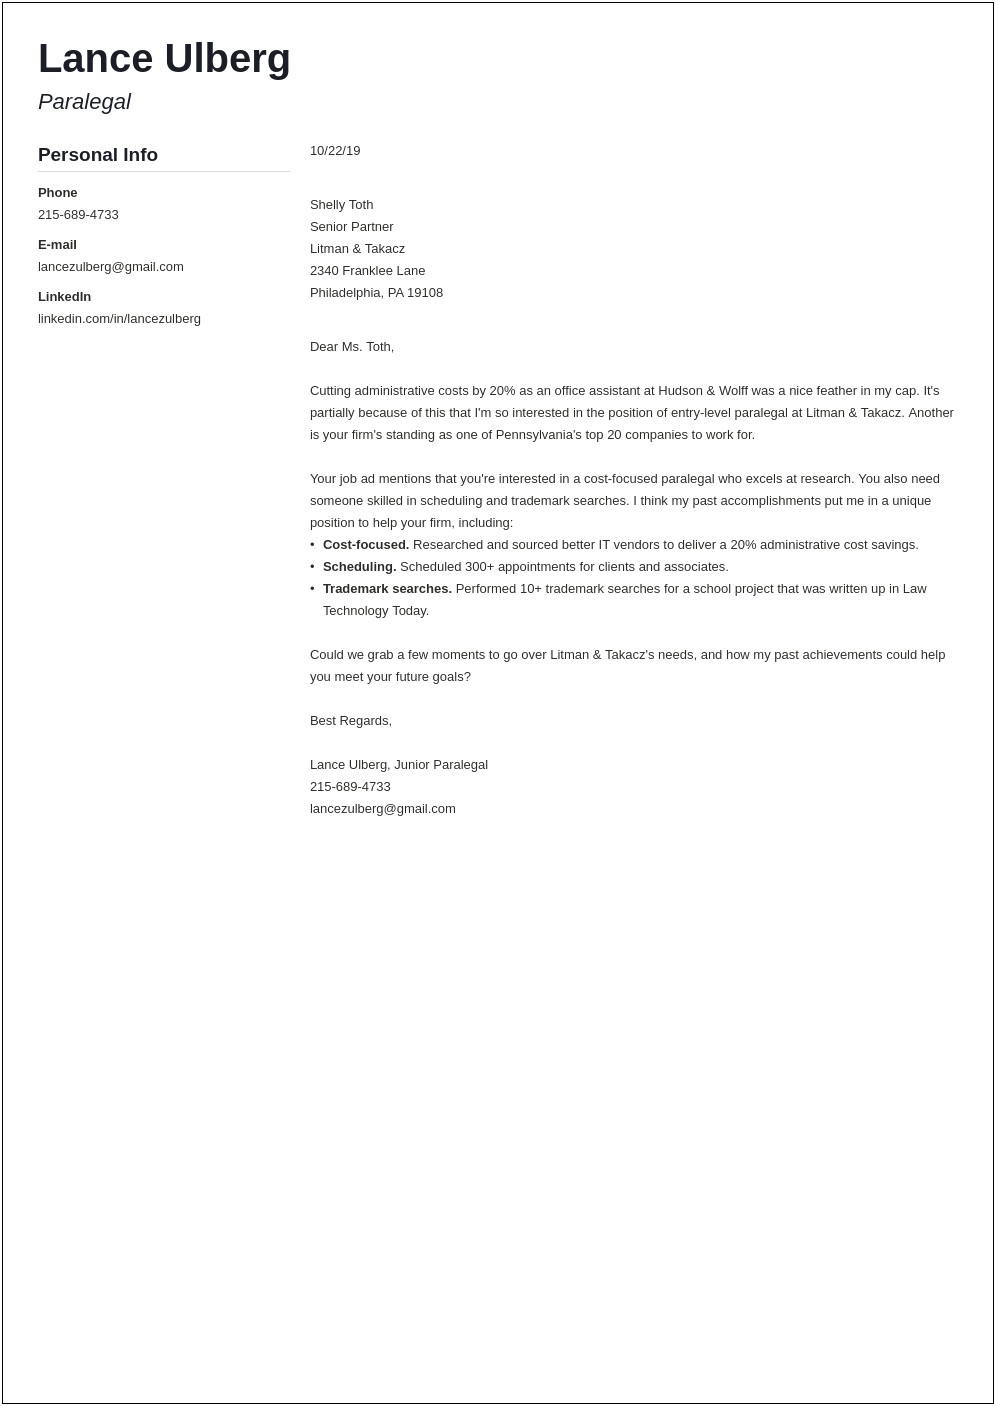 Paralegal Sample Resume And Cover Letter